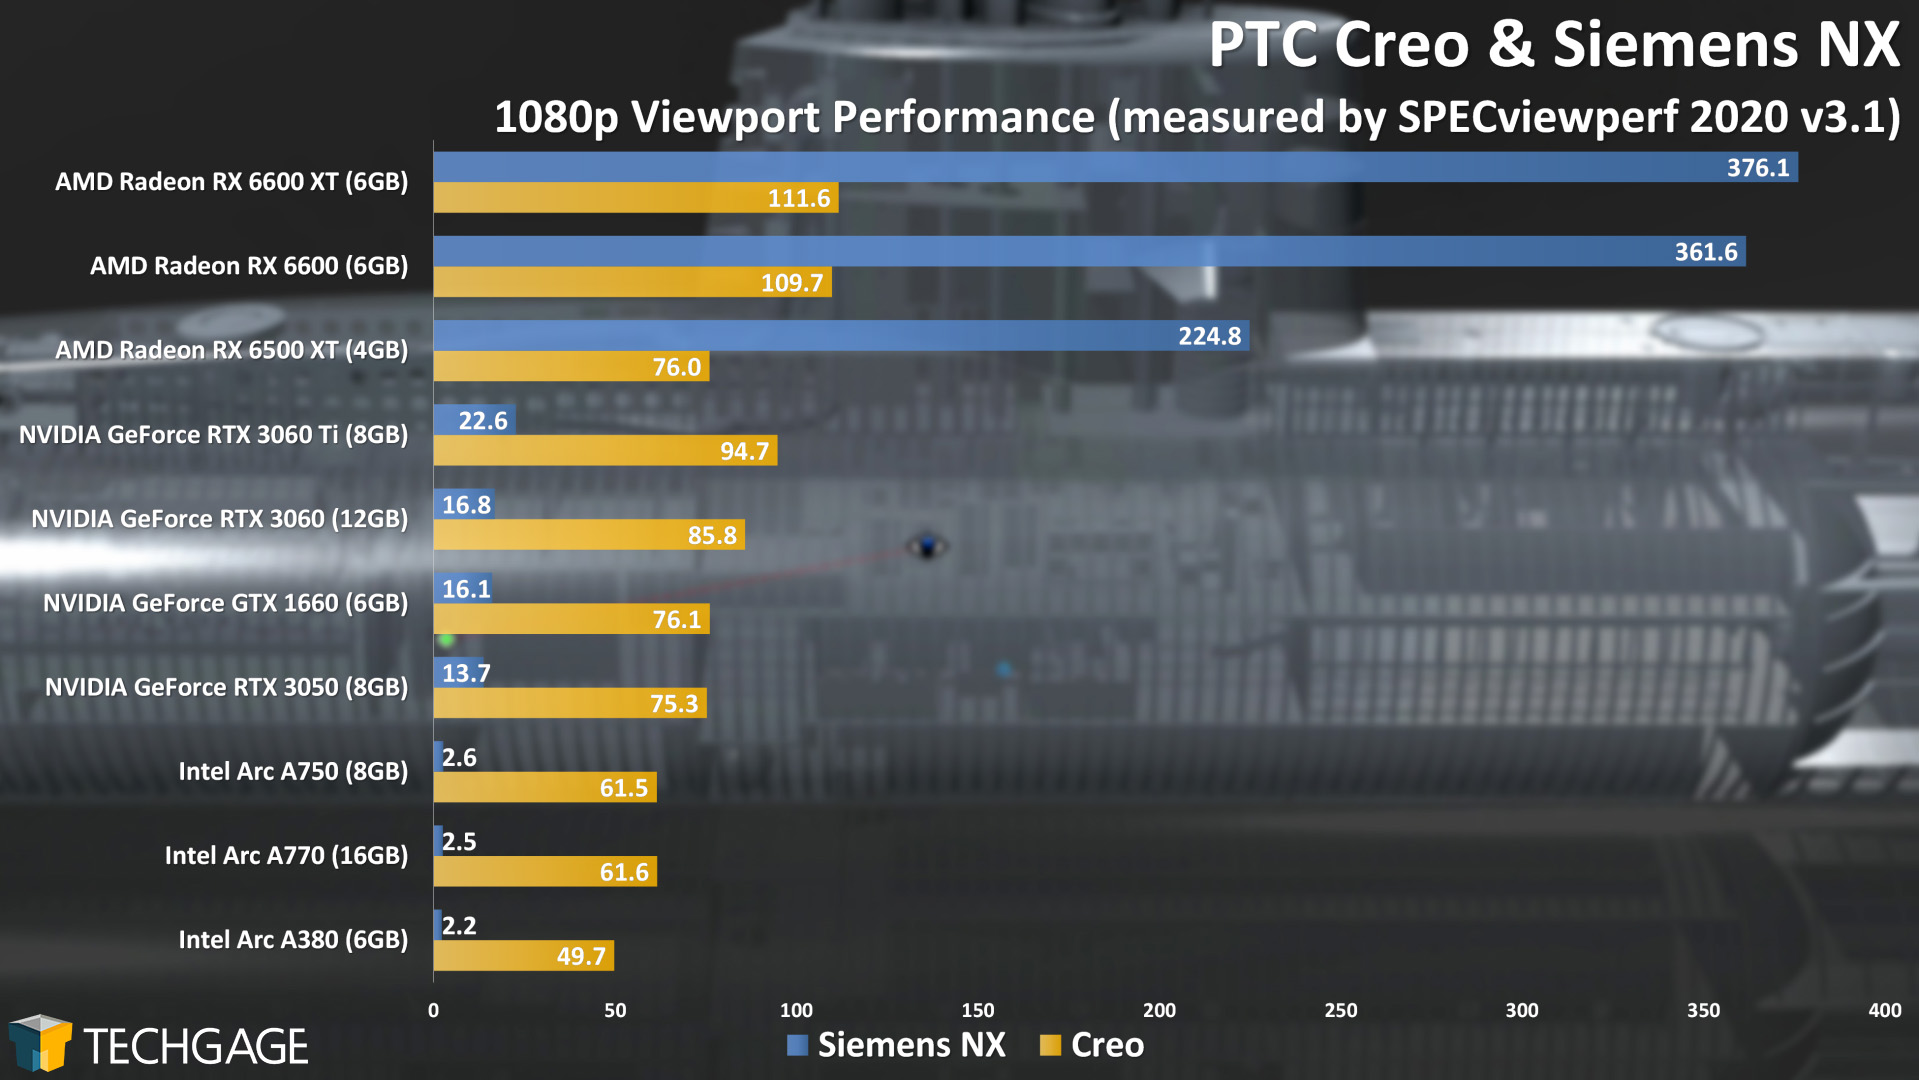 Intel Arc A770 and A750 Performance (Siemens NX and Creo)